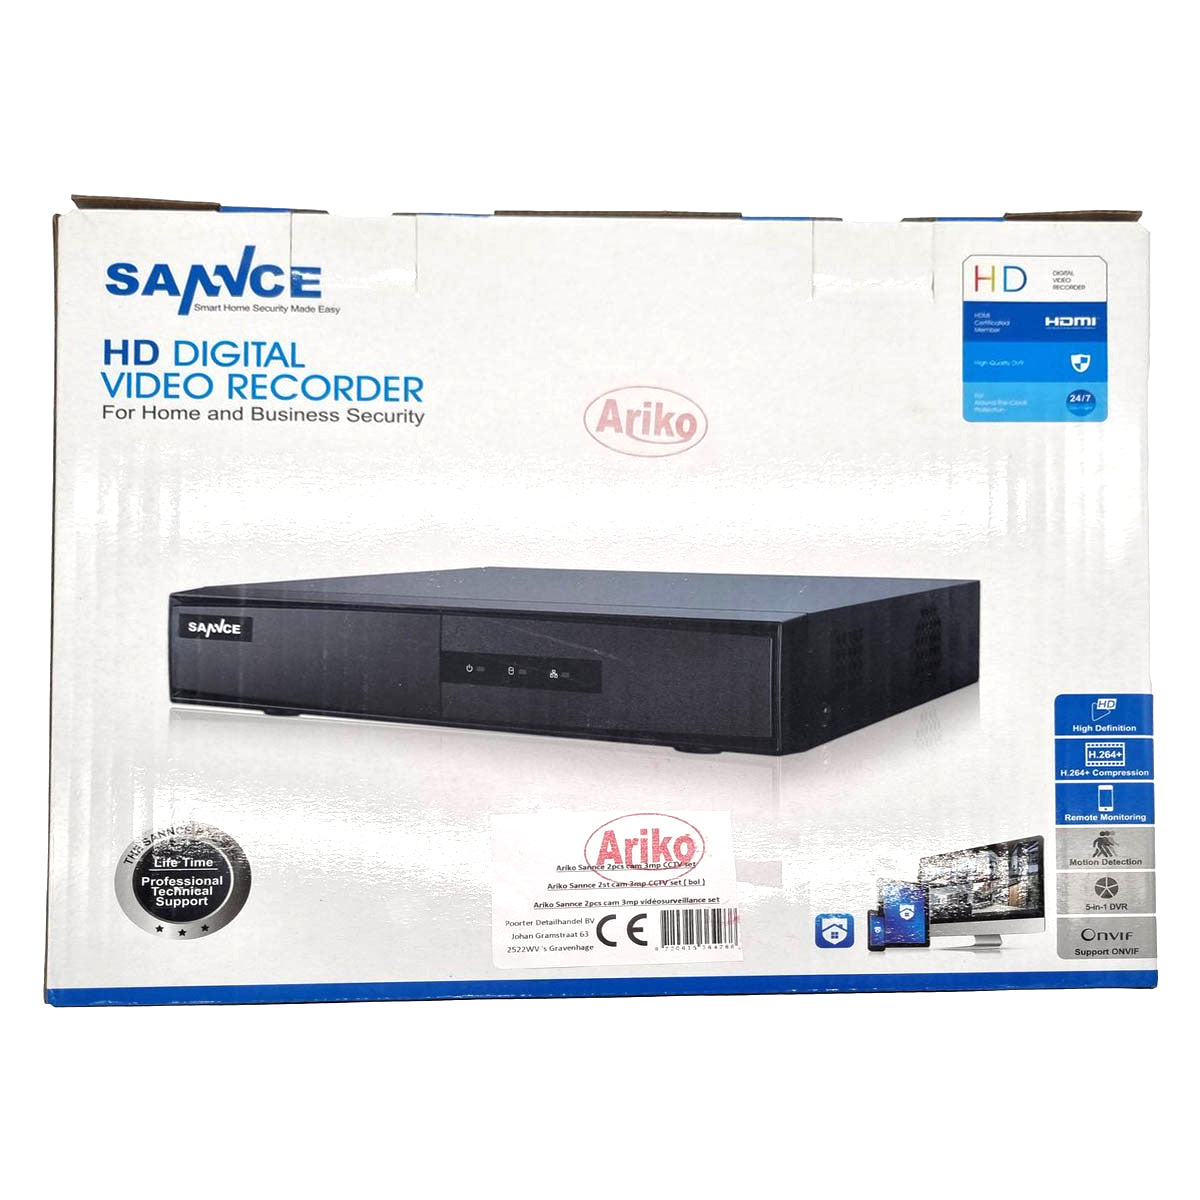 <tc>Ariko</tc> Sannce Camera CCTV system, 2 x Black high quality 3MP security cameras, Night vision 25 mtr, View recorded and live images online, including 1TB hard drive - Dutch helpdesk